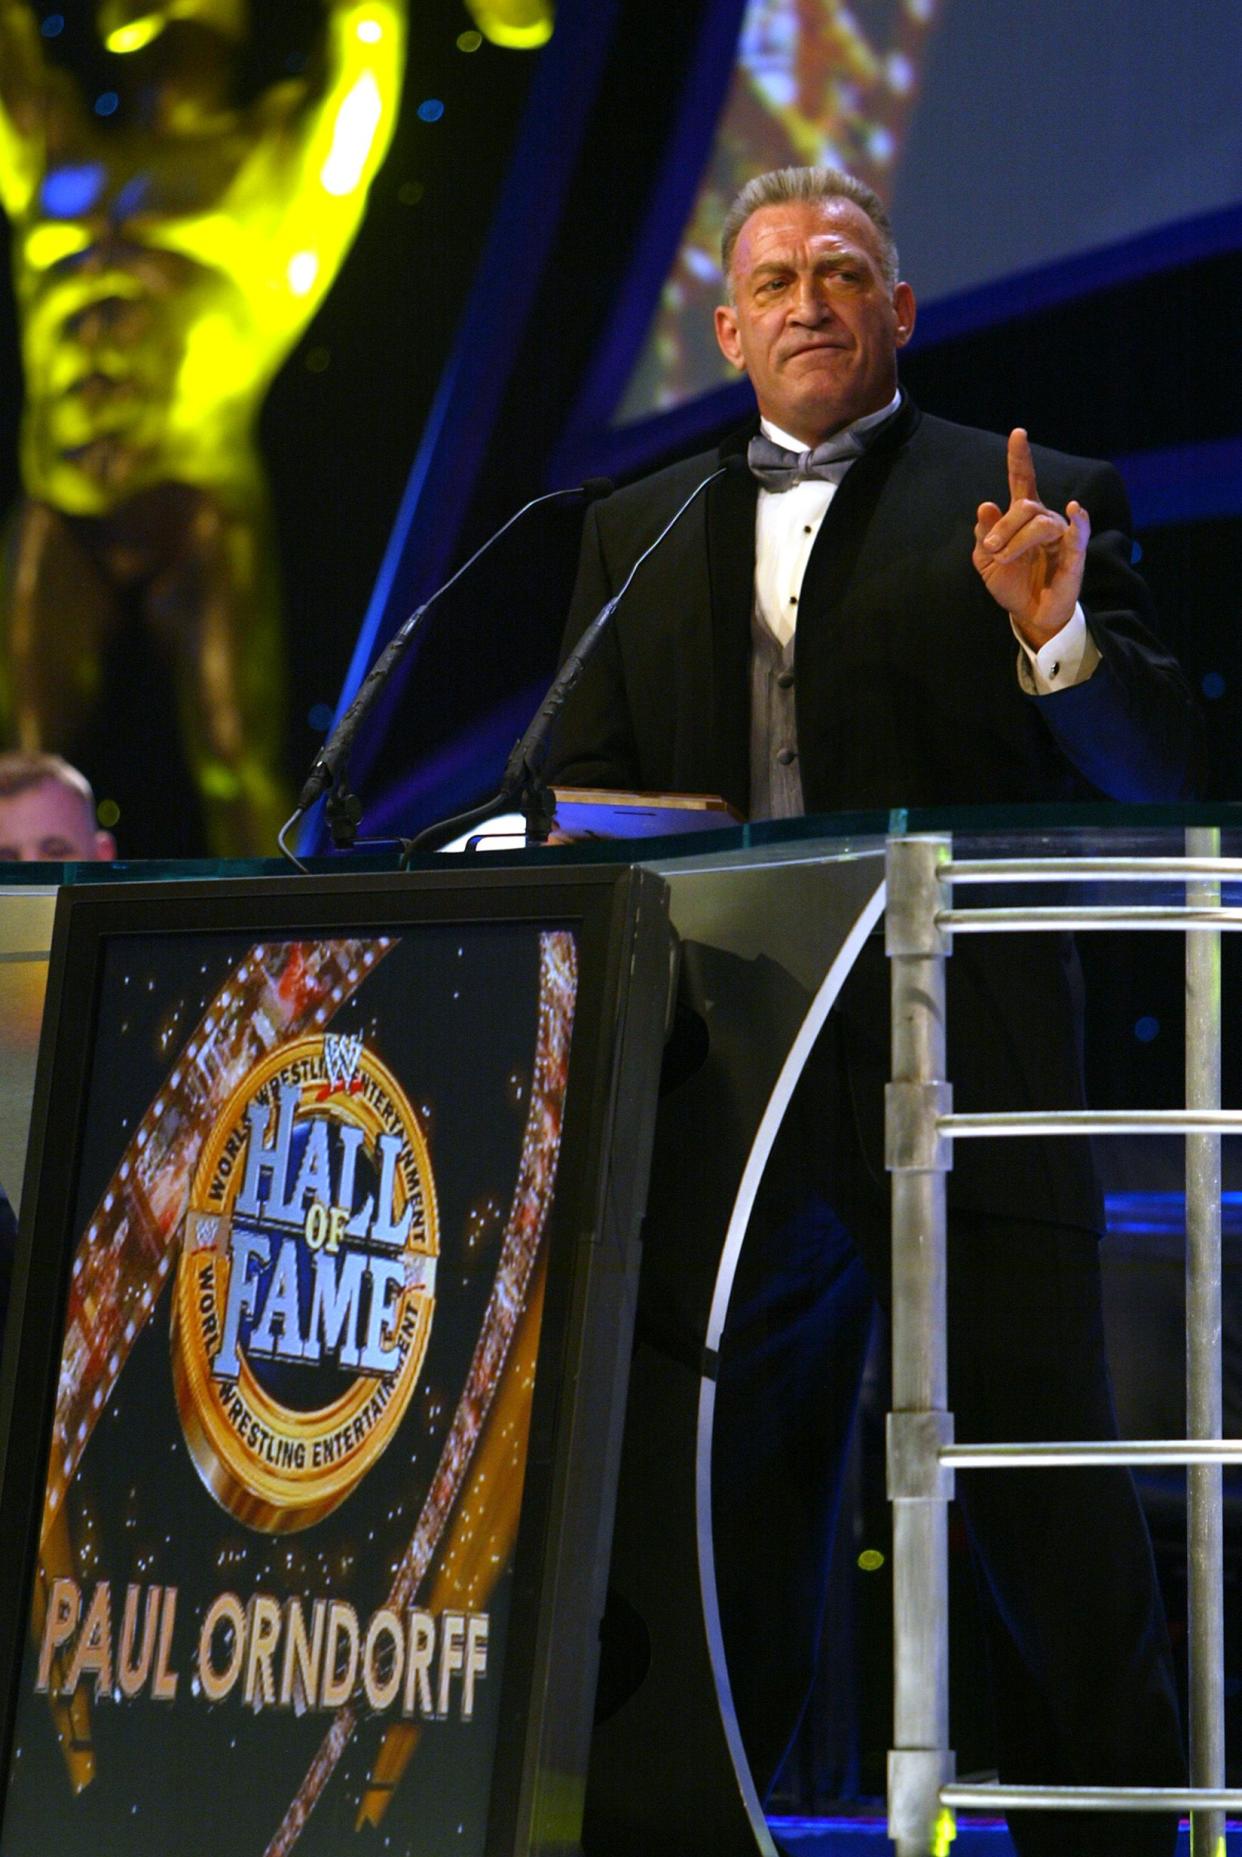 "Mr. Wonderful" Paul Orndorff is inducted into the WWE Hall of Fame in 2005. 